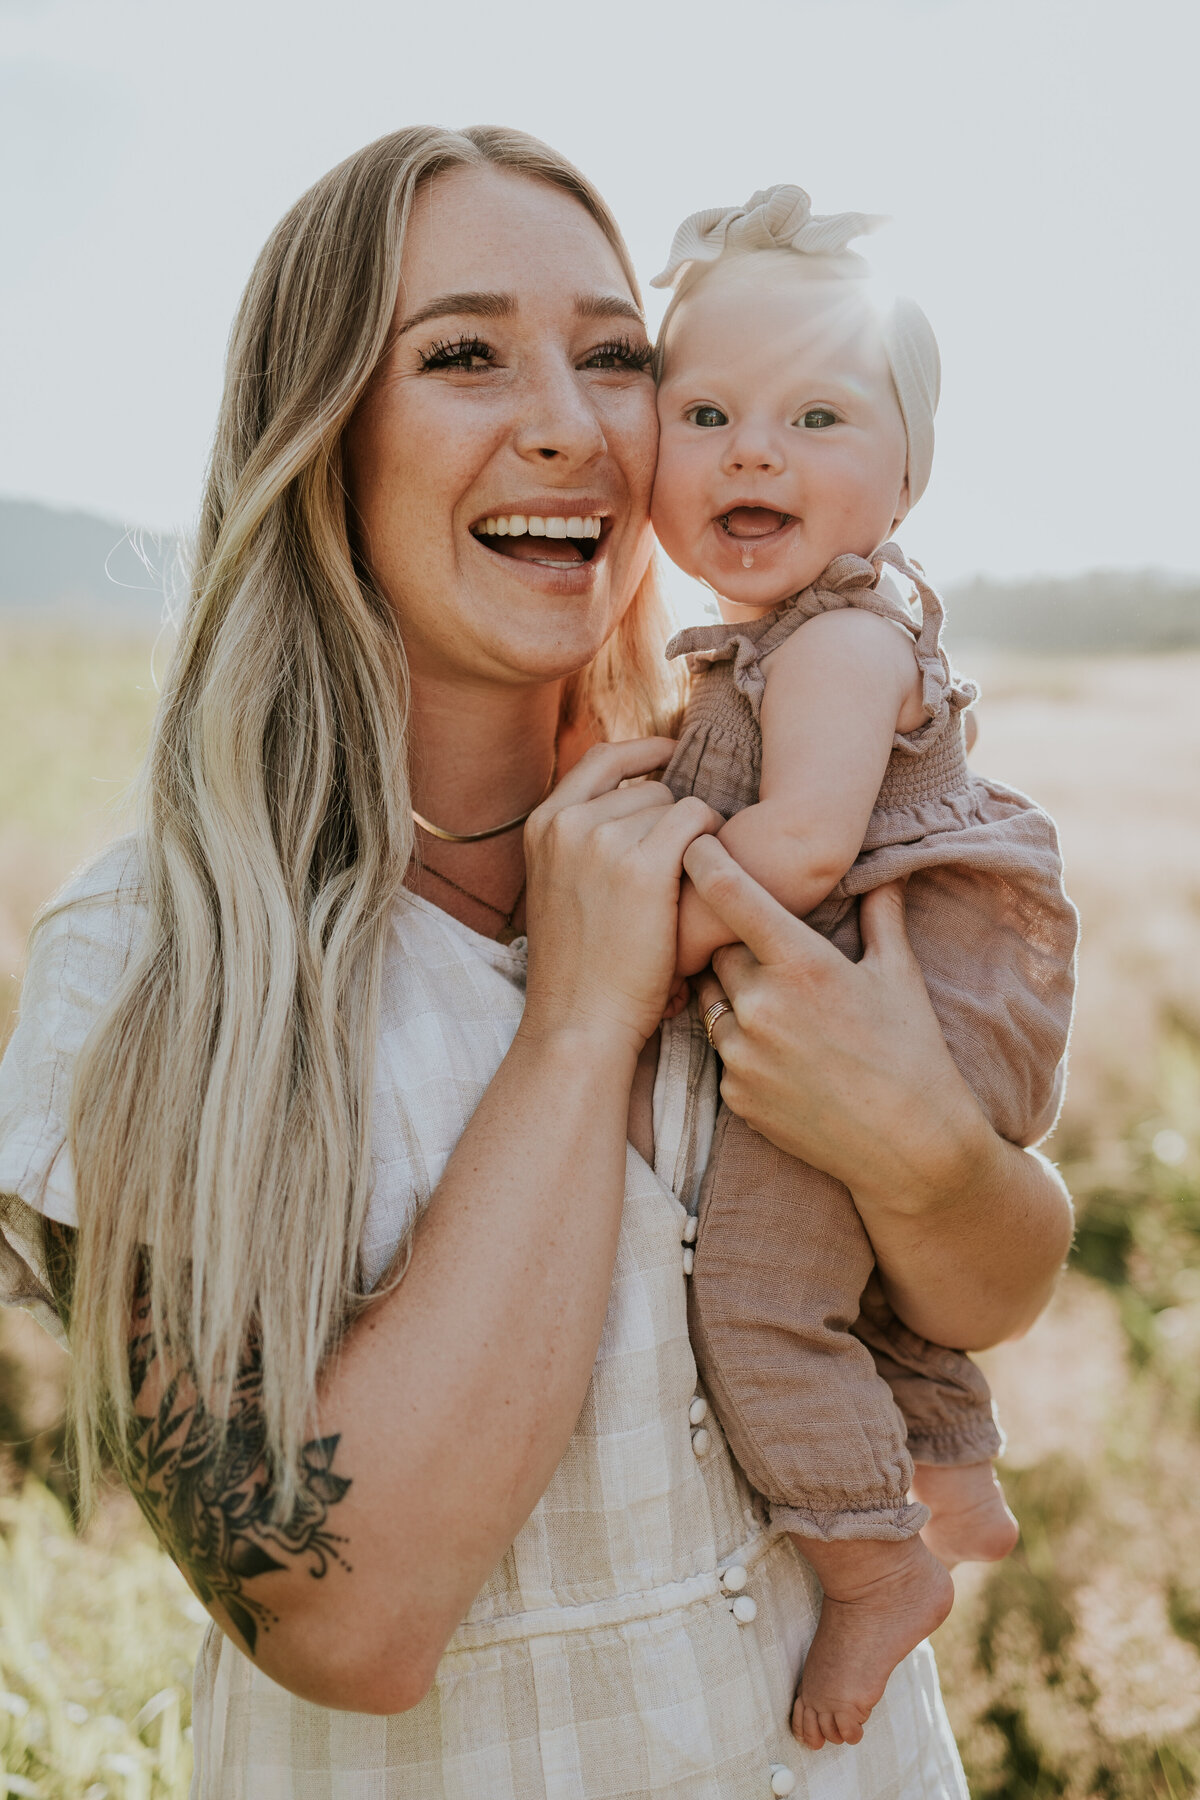 Mama snuggles smiling baby girl while wearing neutrals in the middle of a field.